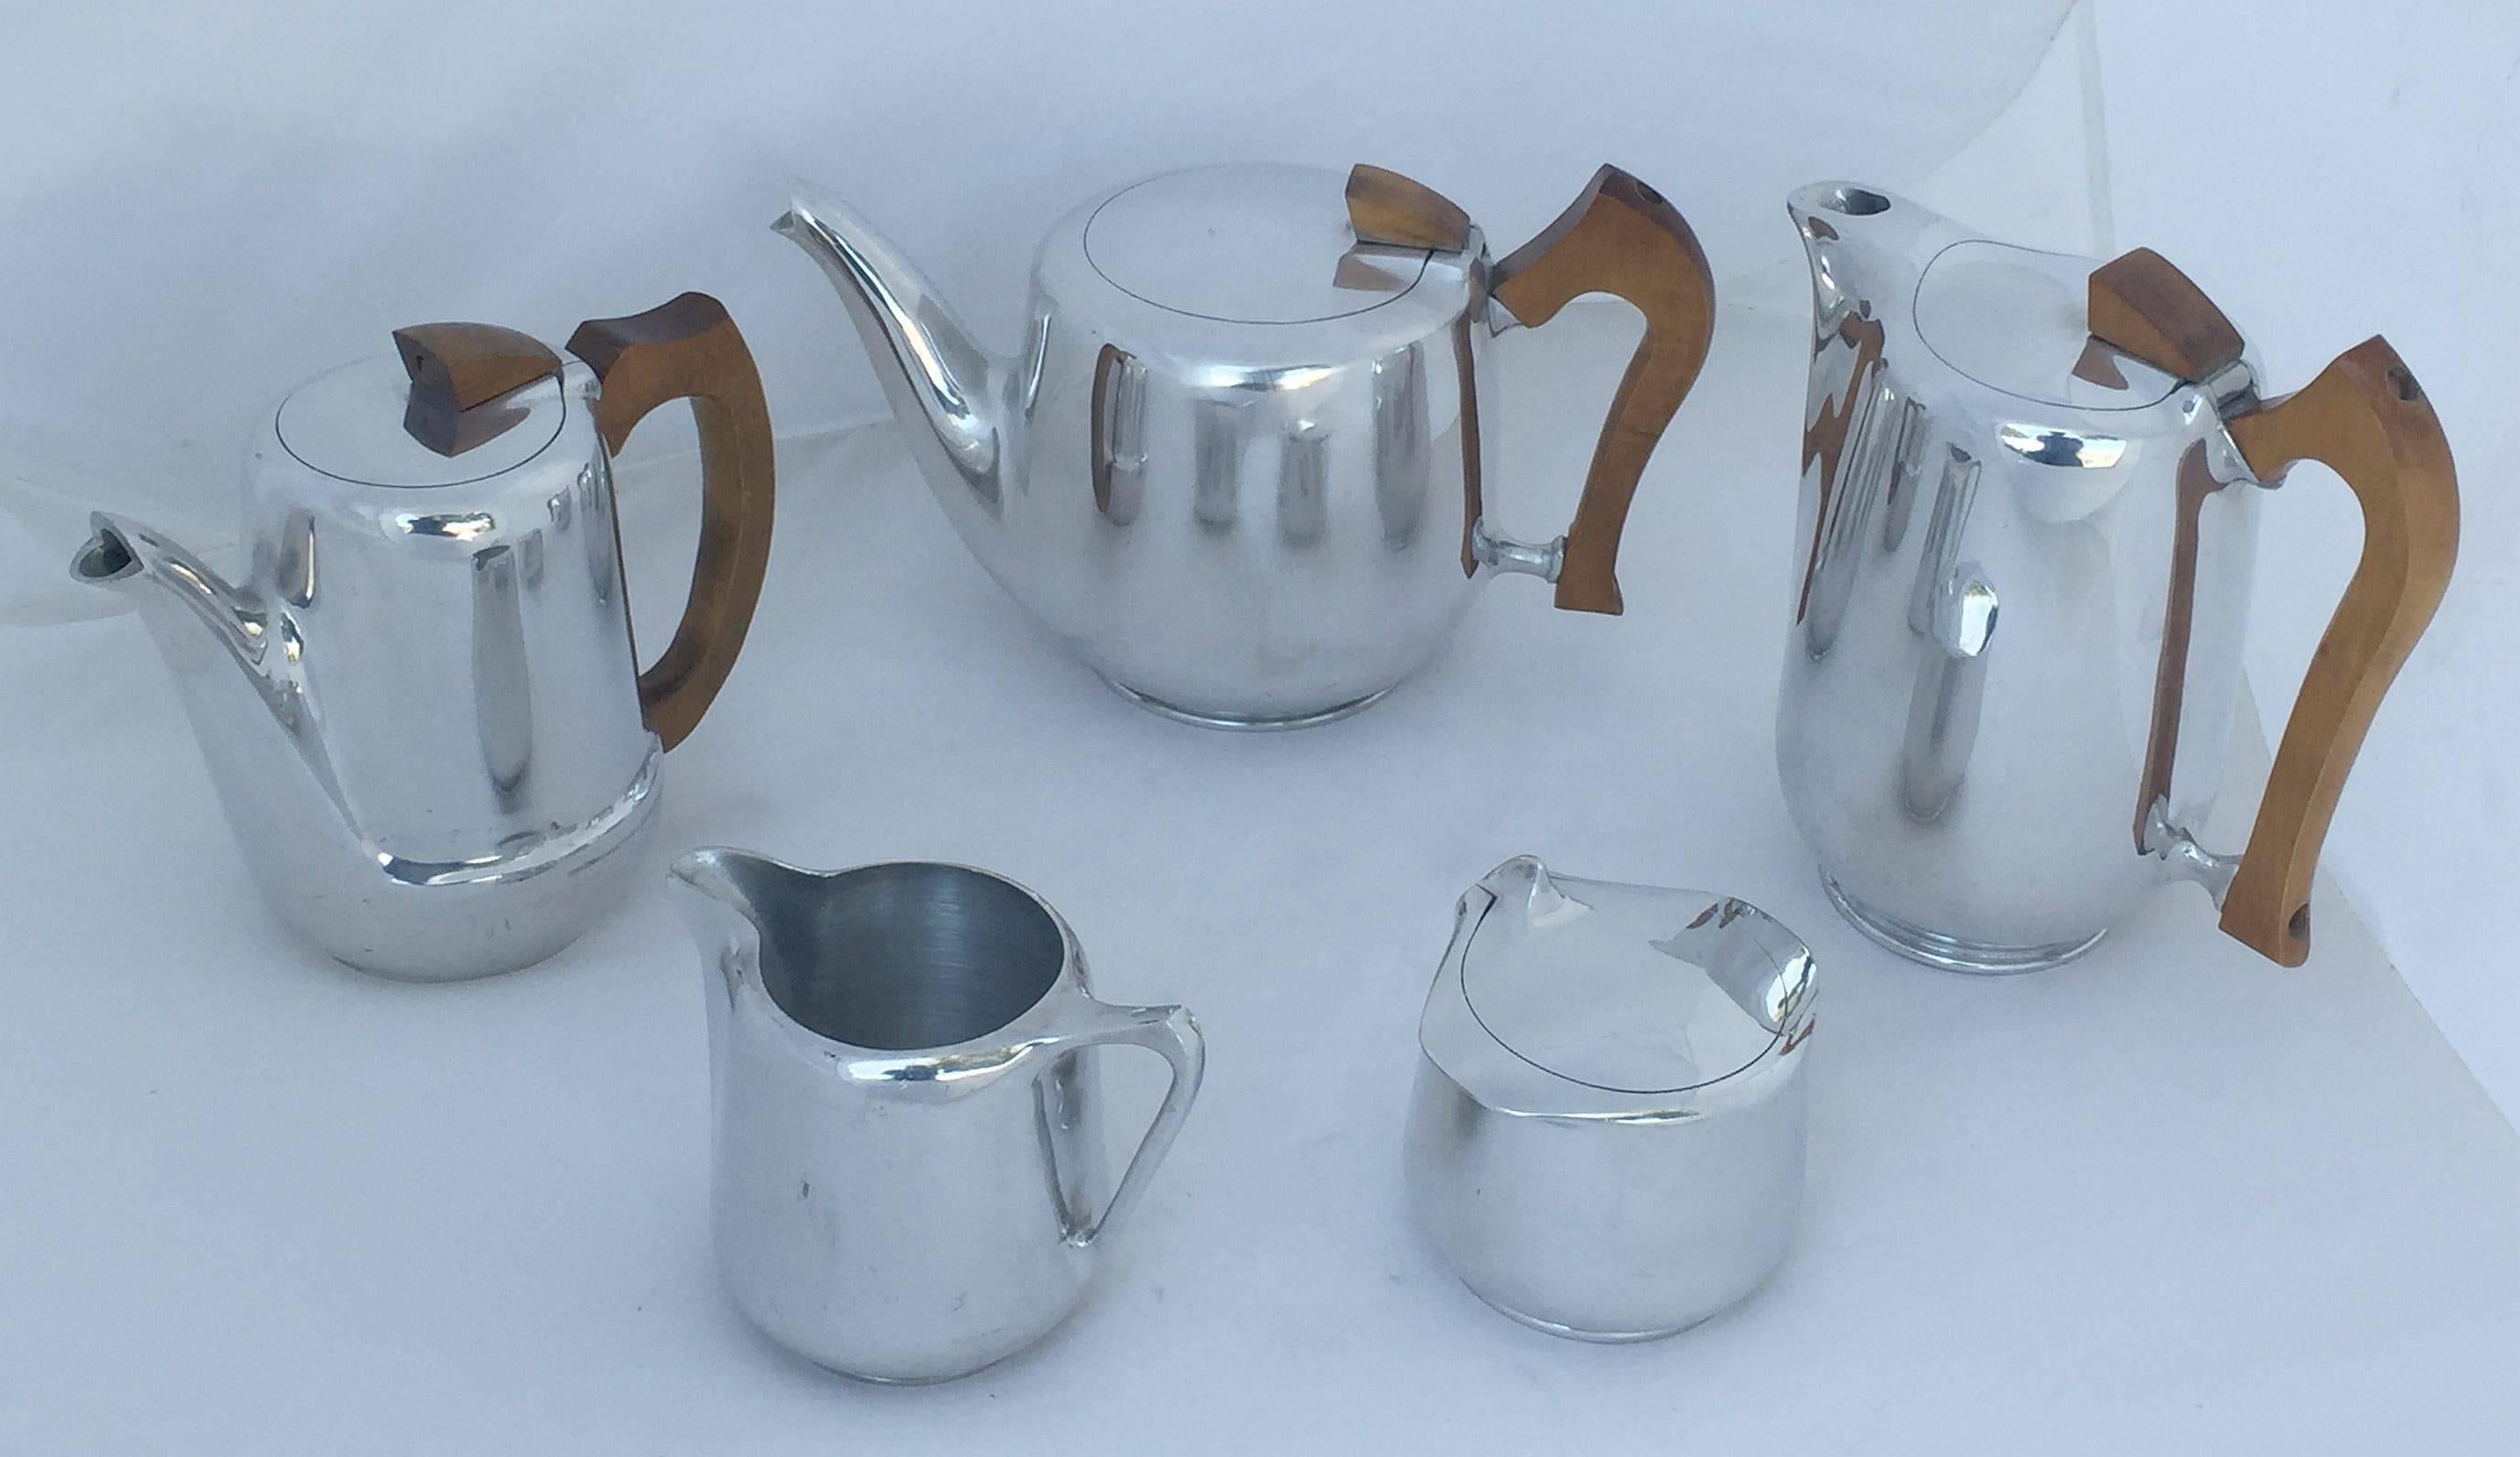 A handsome five-piece English tea and coffee set by Picquot, includes a lidded tea pot with handle, a lidded coffee pot with handle, a lidded hot water carafe with handle, and lidded sugar and creamer, all featuring the stylish mid-century design